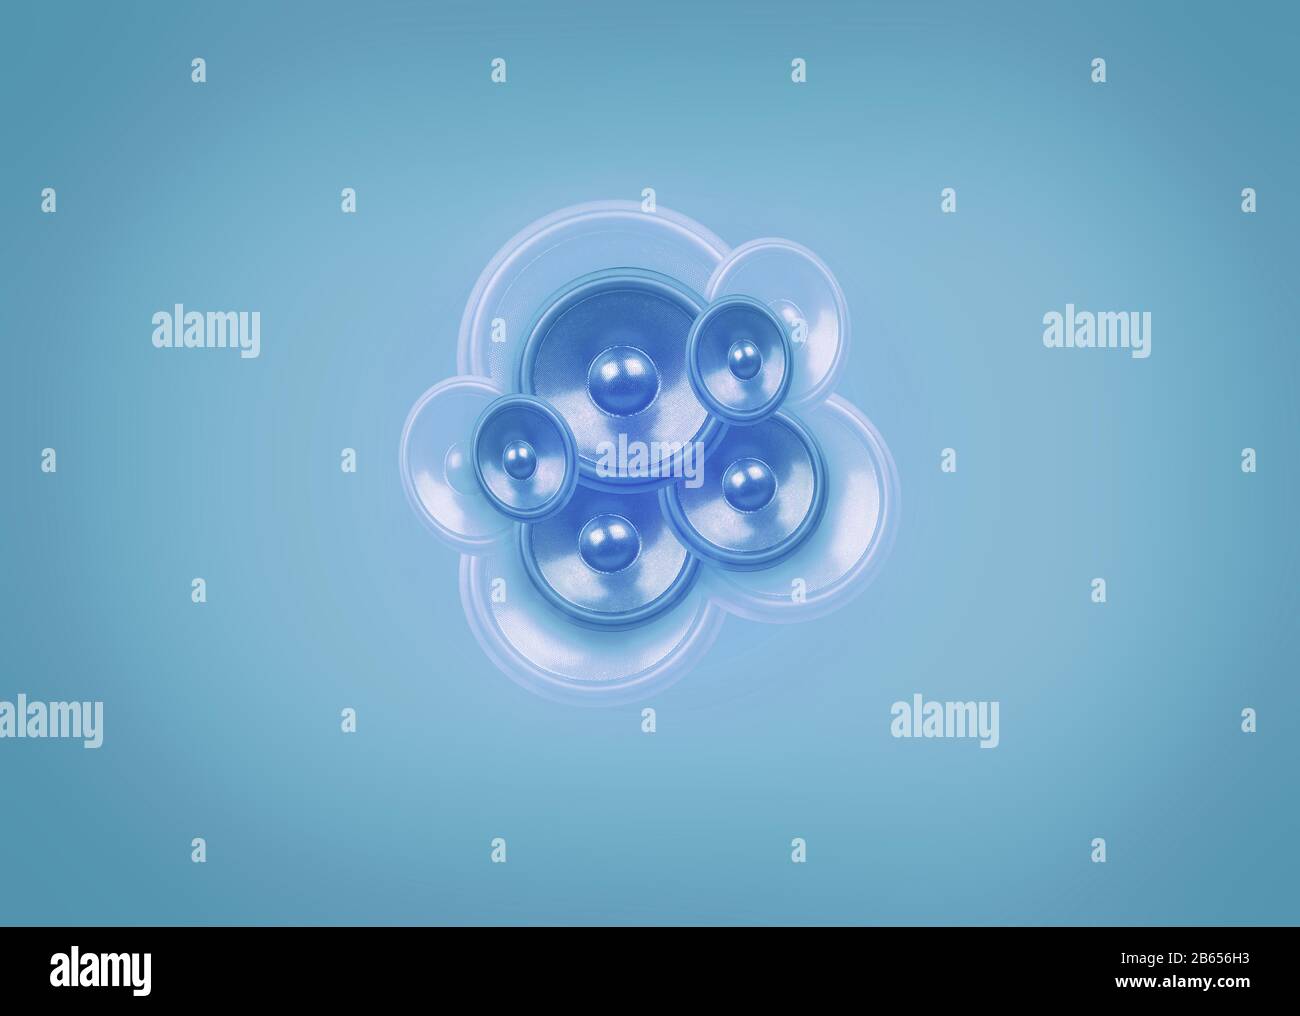 Audio speakers on a light blue background with vignette Stock Photo